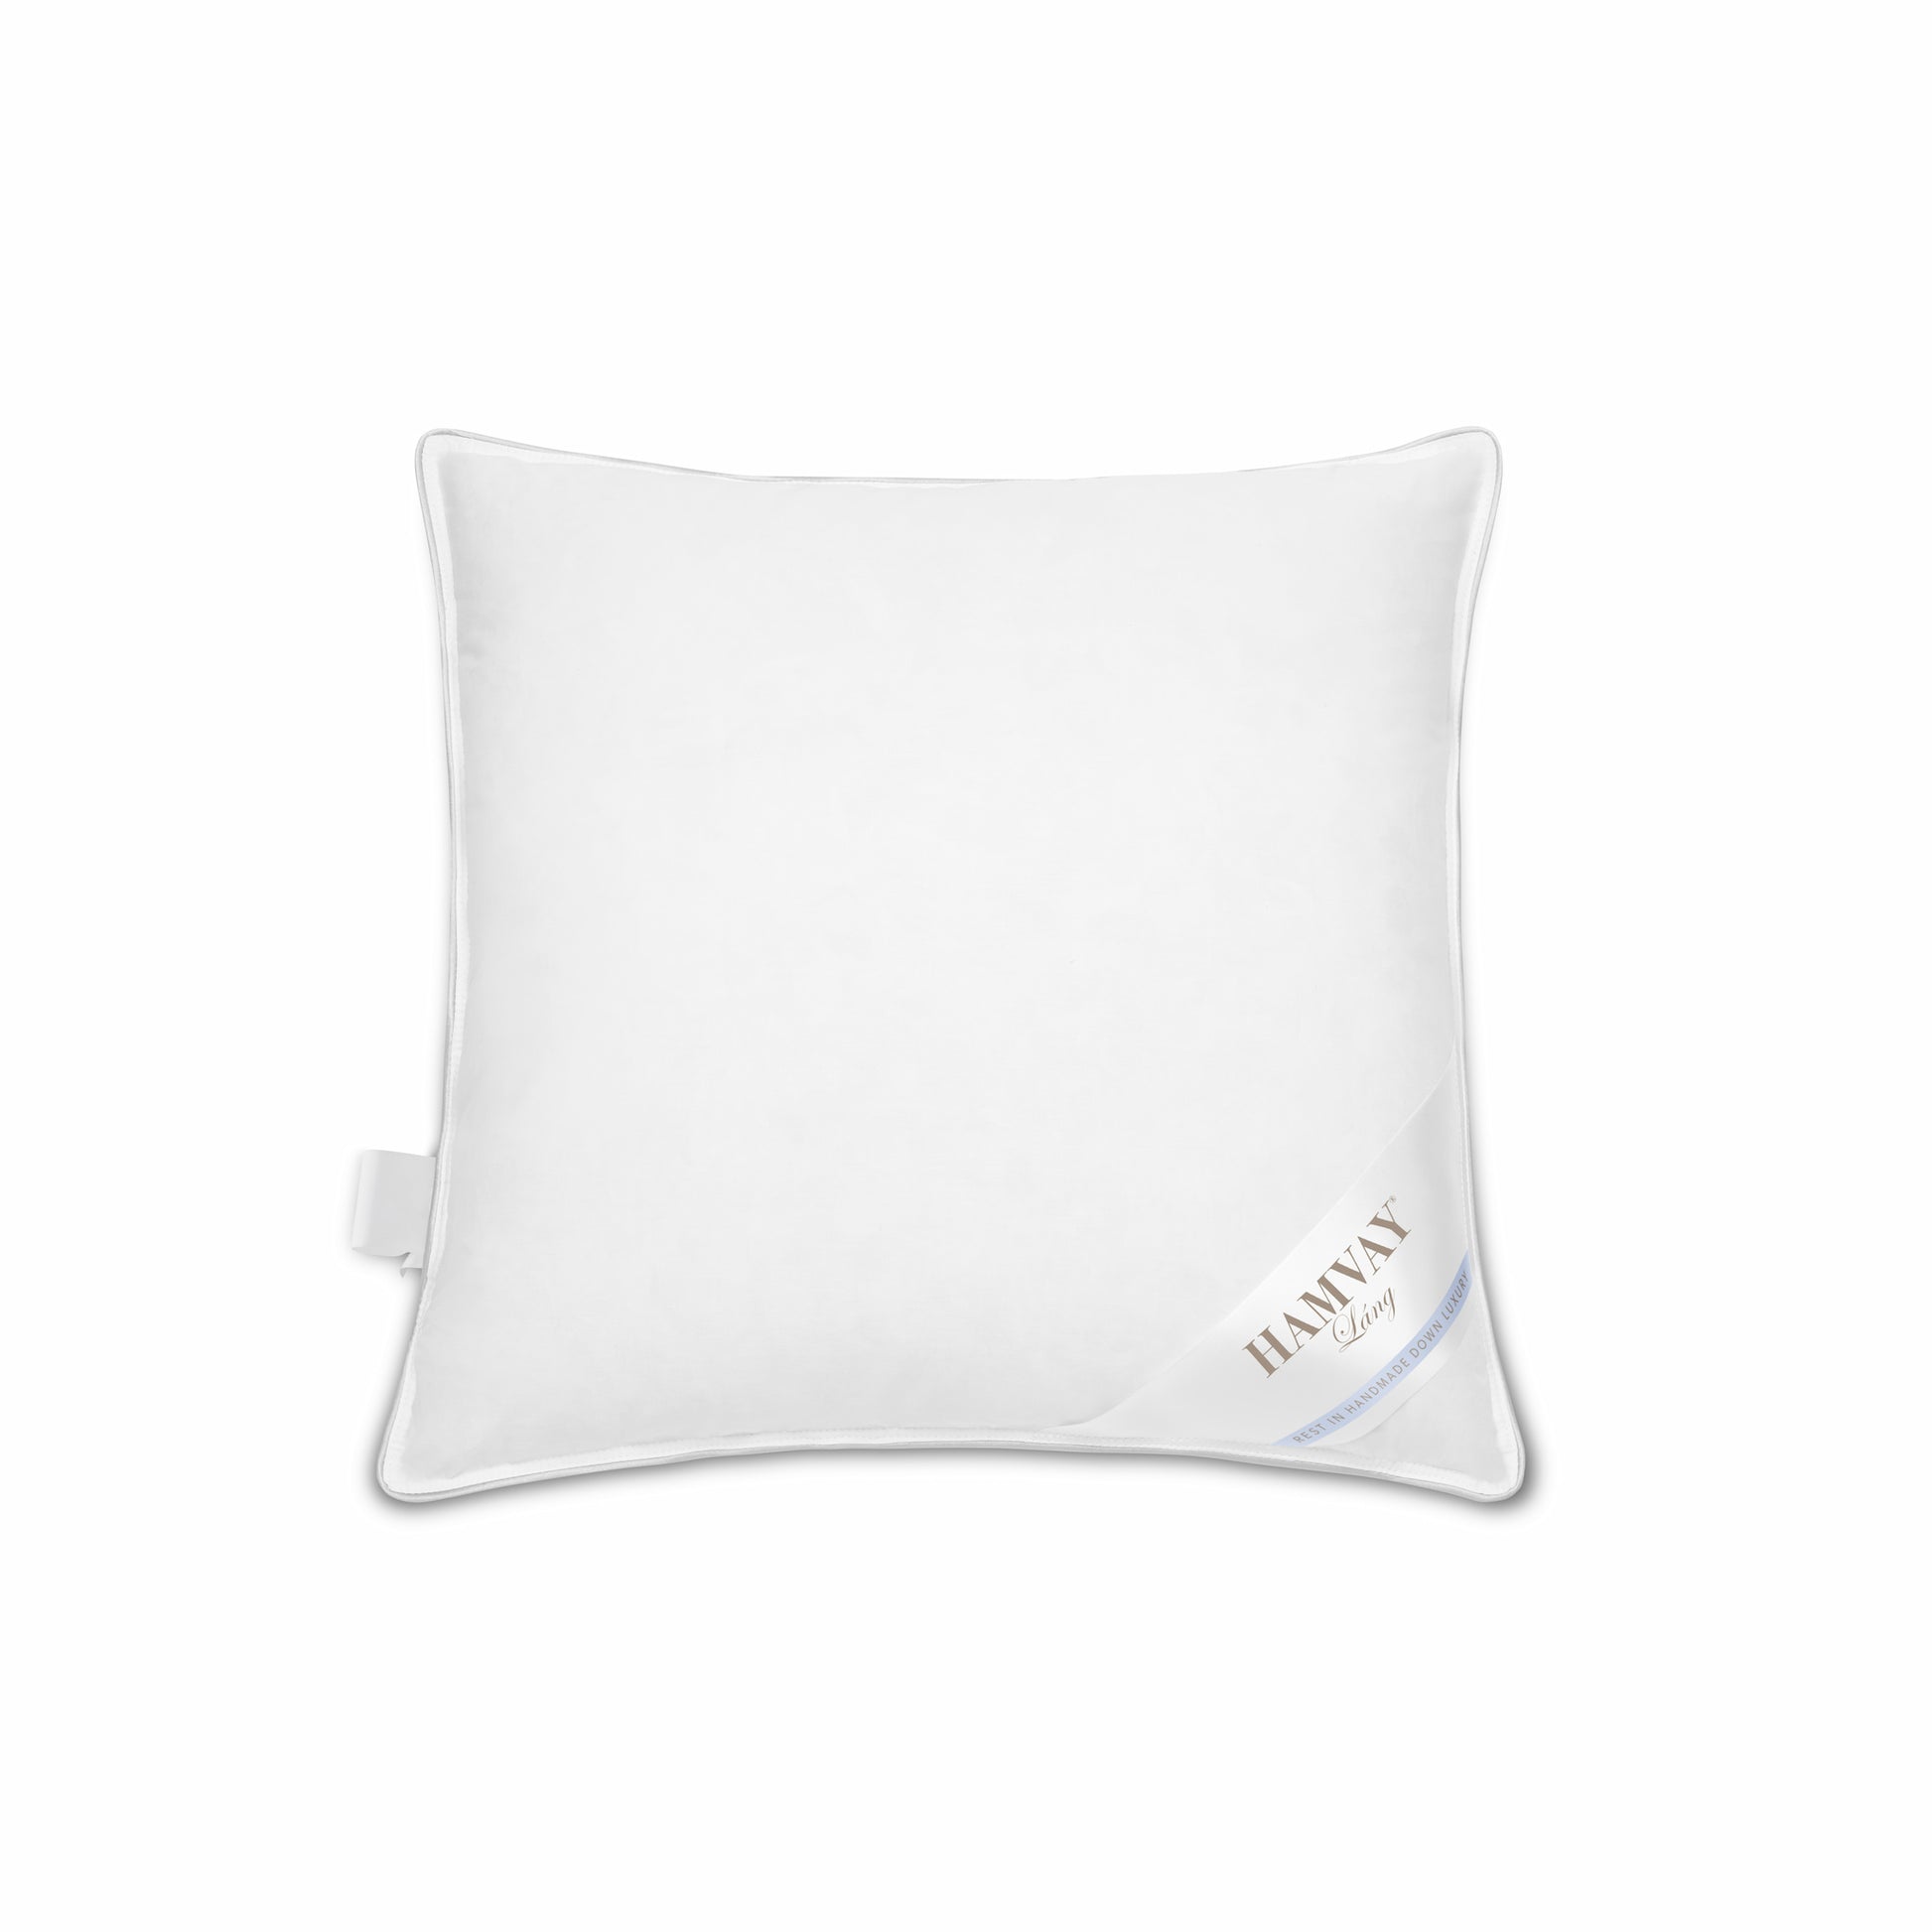 Throw Pillow Inserts (Set of 4, White), 18 X 18 Inches Pillow Inserts for  Sofa